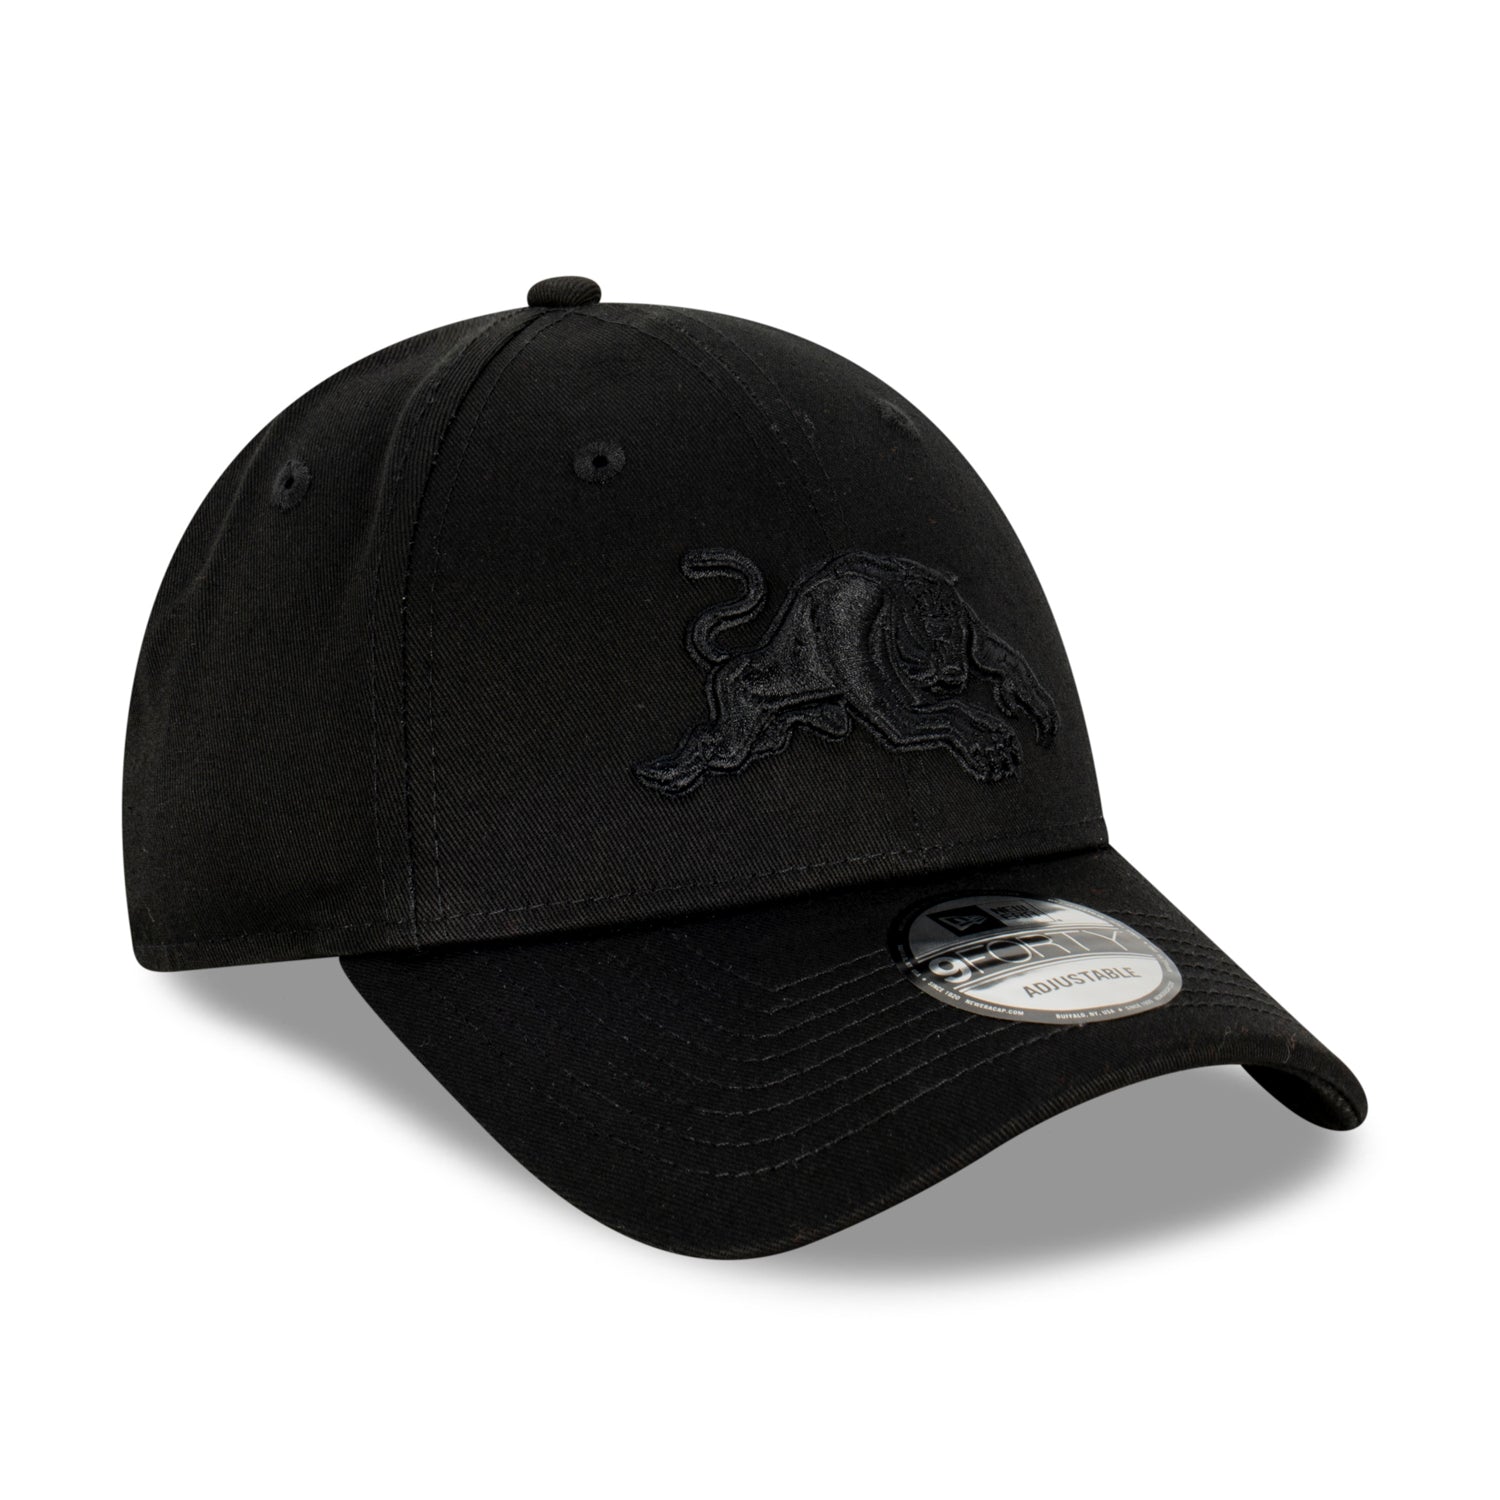 Penrith Panthers New Era 9Forty Snapback Cap